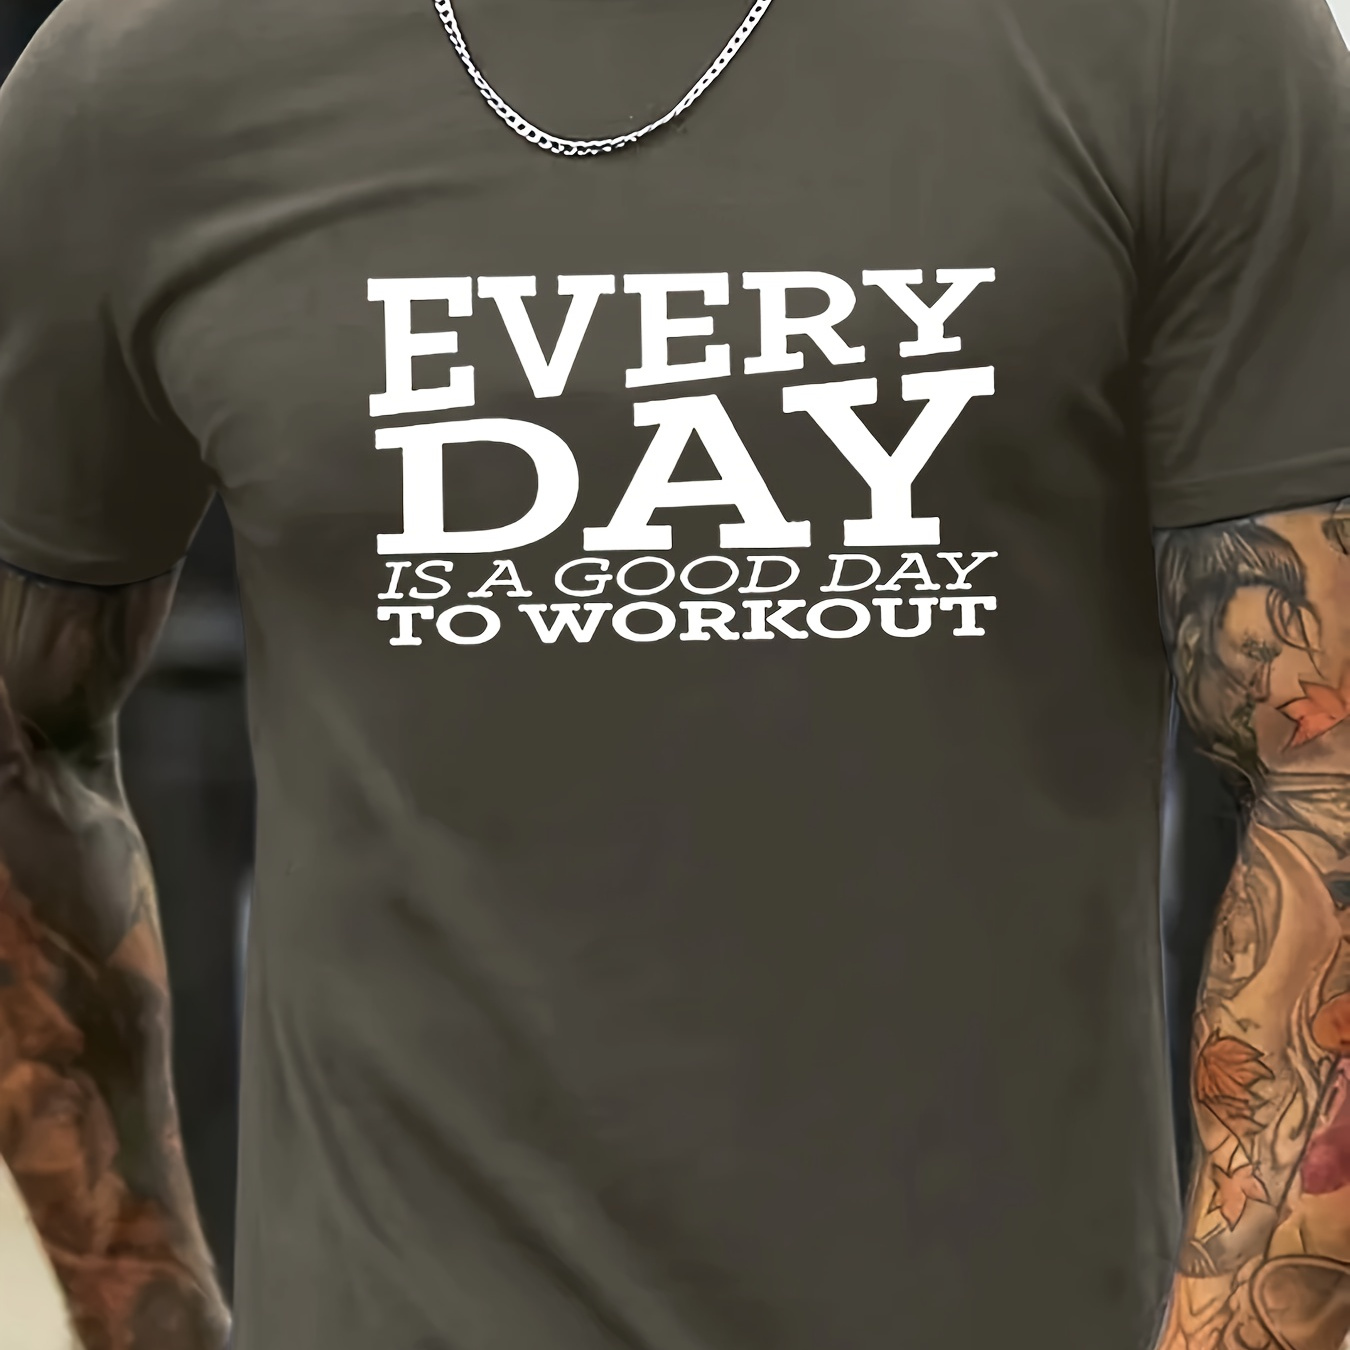 

Everyday Is A Good Day To Workout Letters Print Casual Crew Neck Short Sleeves For Men, Quick-drying Comfy Casual Summer T-shirt For Daily Wear Work Out And Vacation Resorts